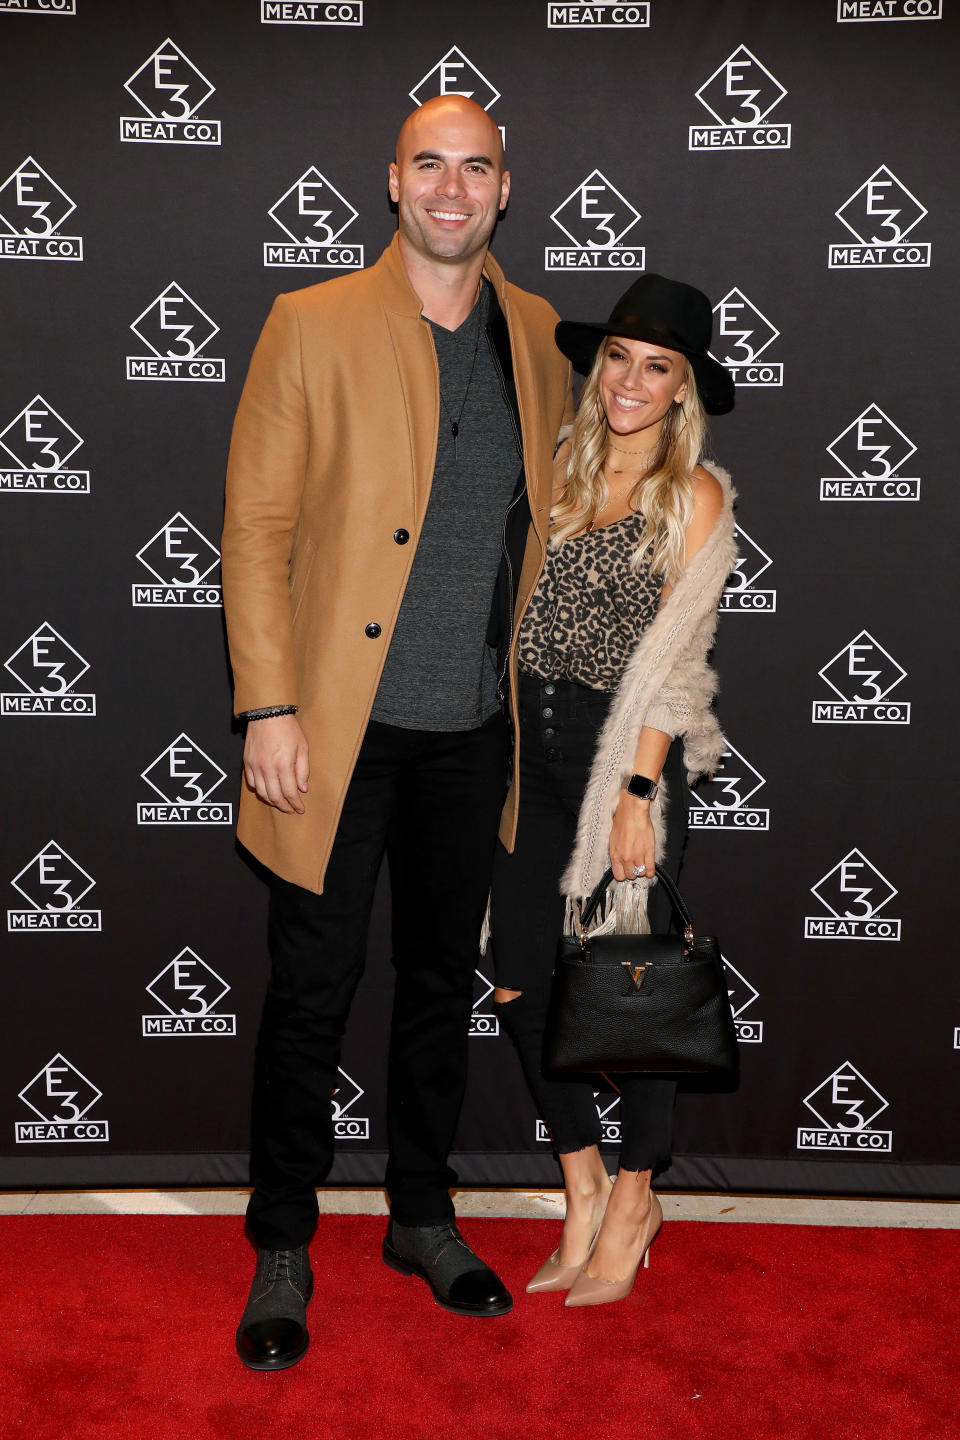 NASHVILLE, TENNESSEE - NOVEMBER 20: Mike Caussin (L) and Jana Kramer attend the grand opening of E3 Chophouse Nashville on November 20, 2019 in Nashville, Tennessee. (Photo by Danielle Del Valle/Getty Images for E3 Chophouse Nashville)